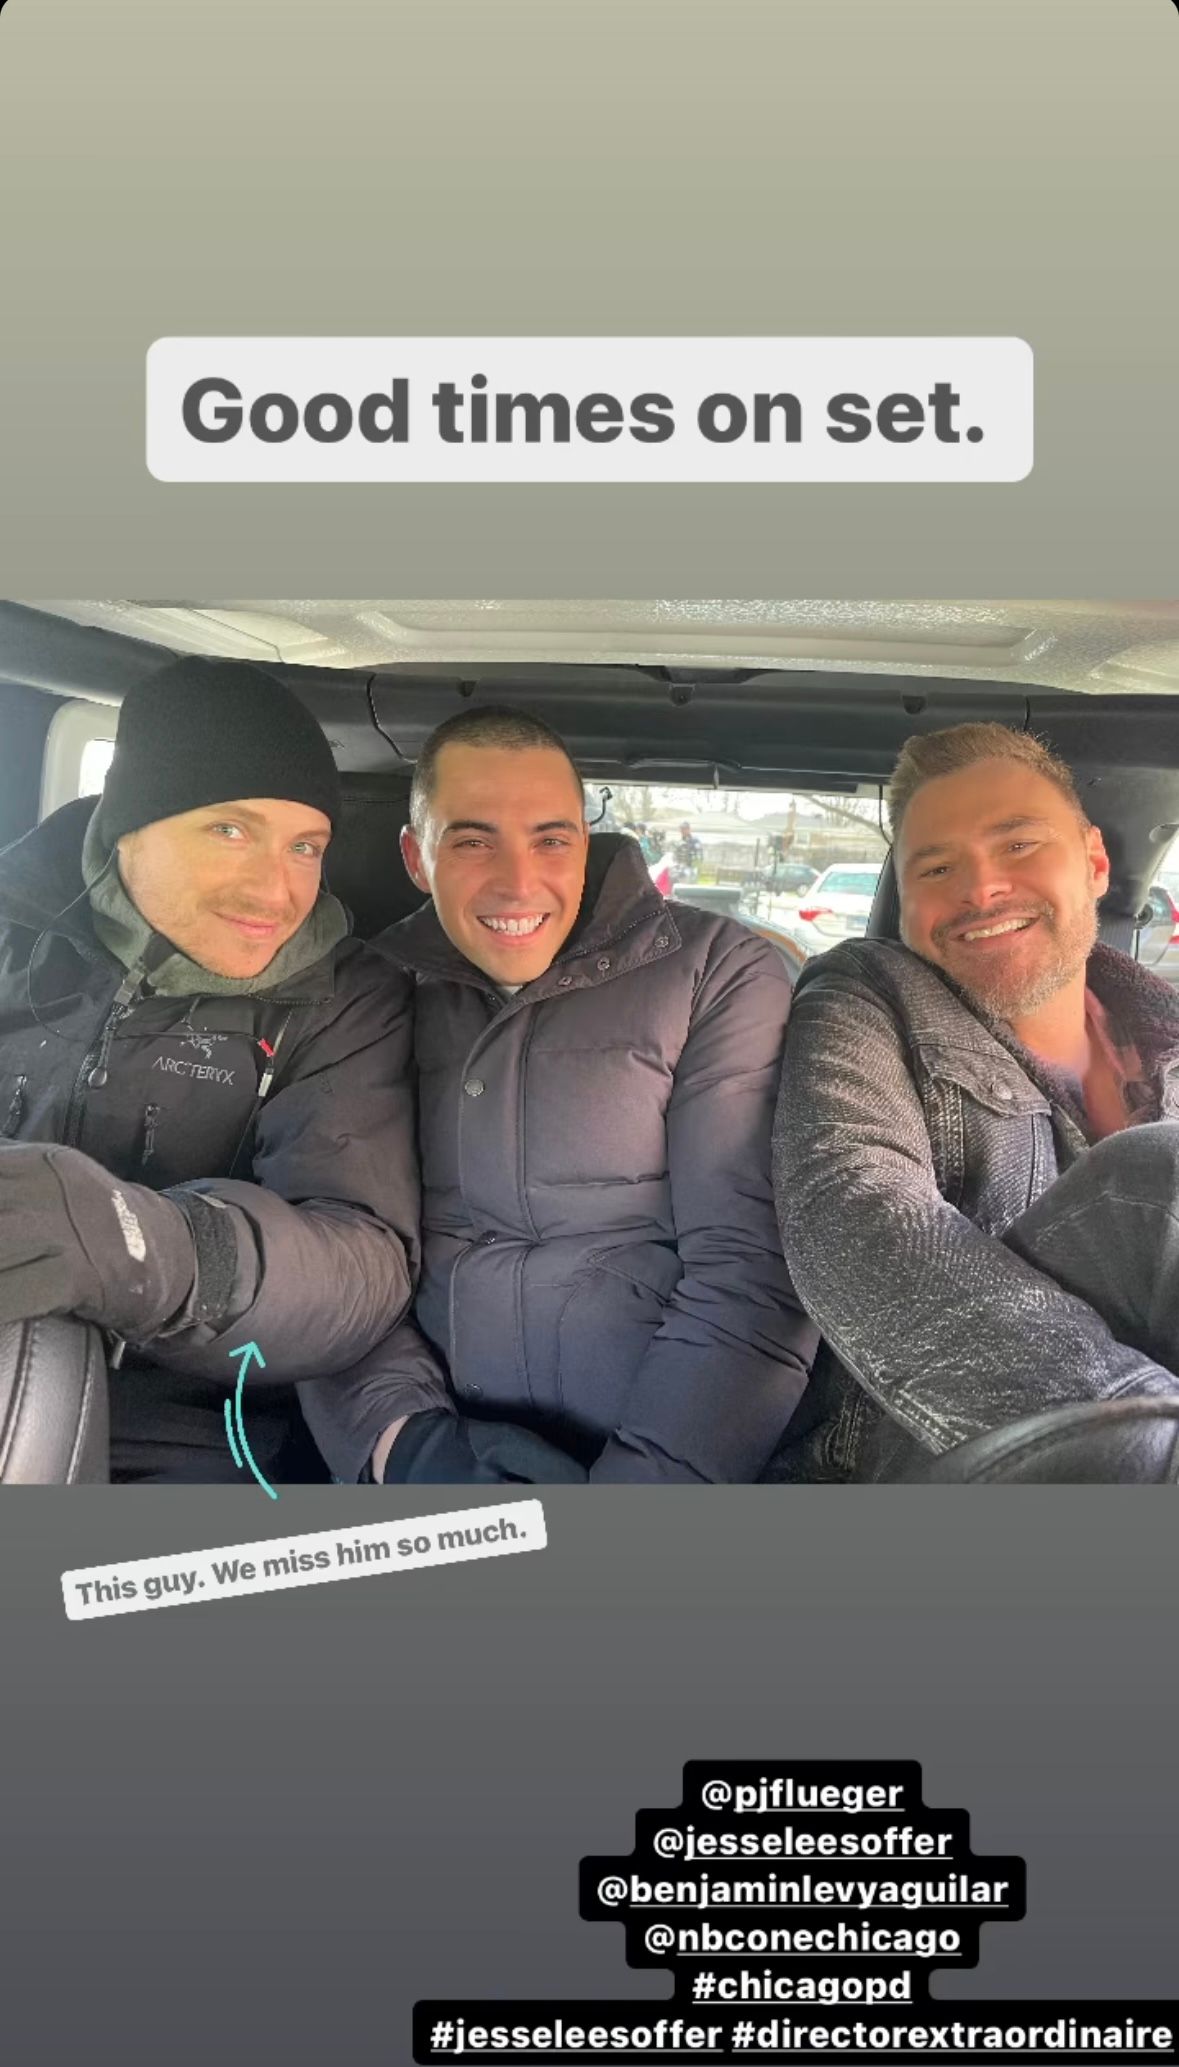 Jesse Lee Soffer, Benjamin Levy Aguilar, and Patrick Fleuger on the set of Chicago PD season 11